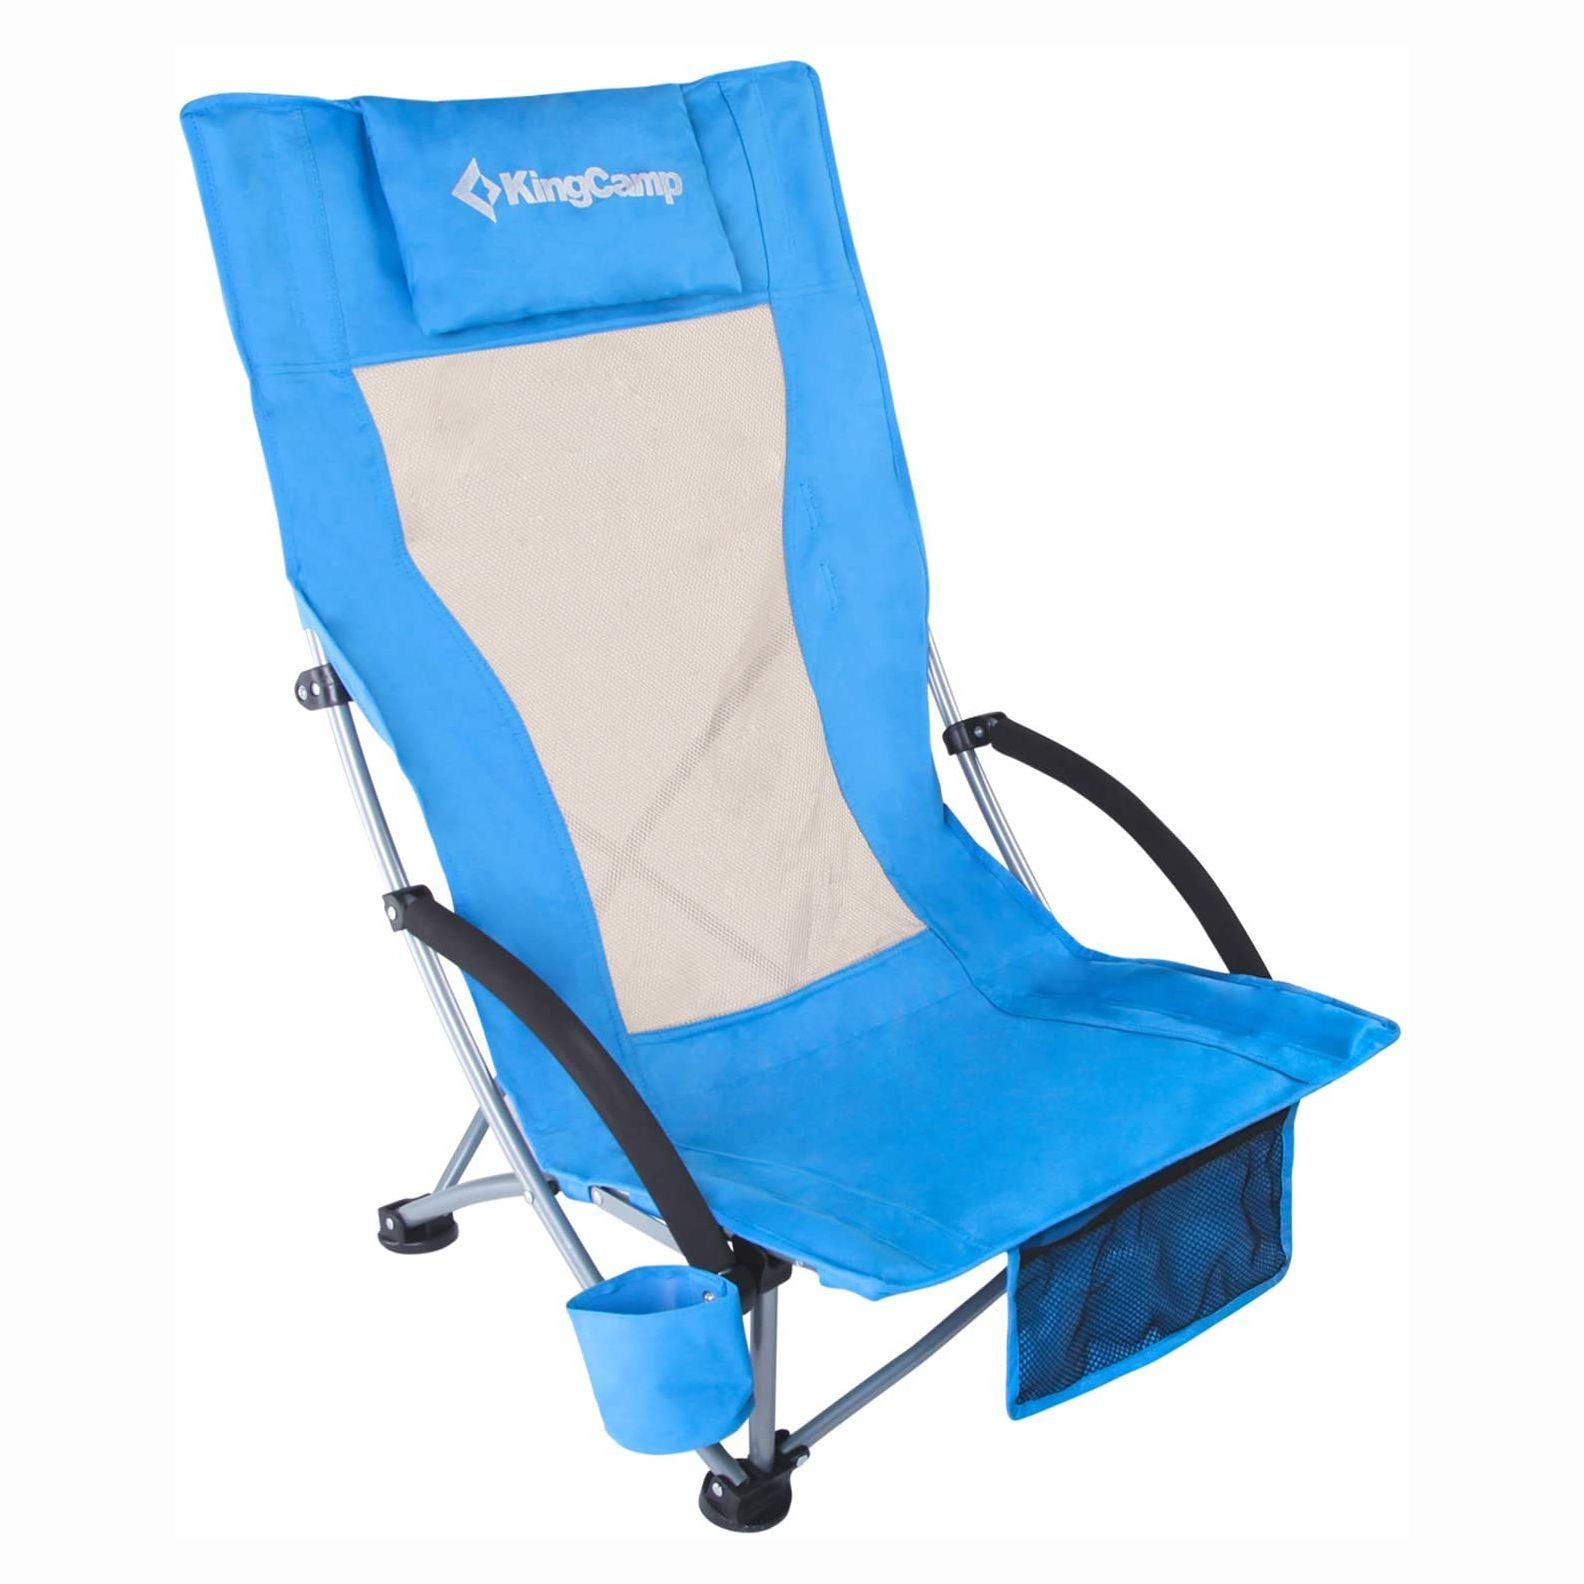 Backpack Beach Chairs For Adults: Lightweight Low Back Folding Portable ...